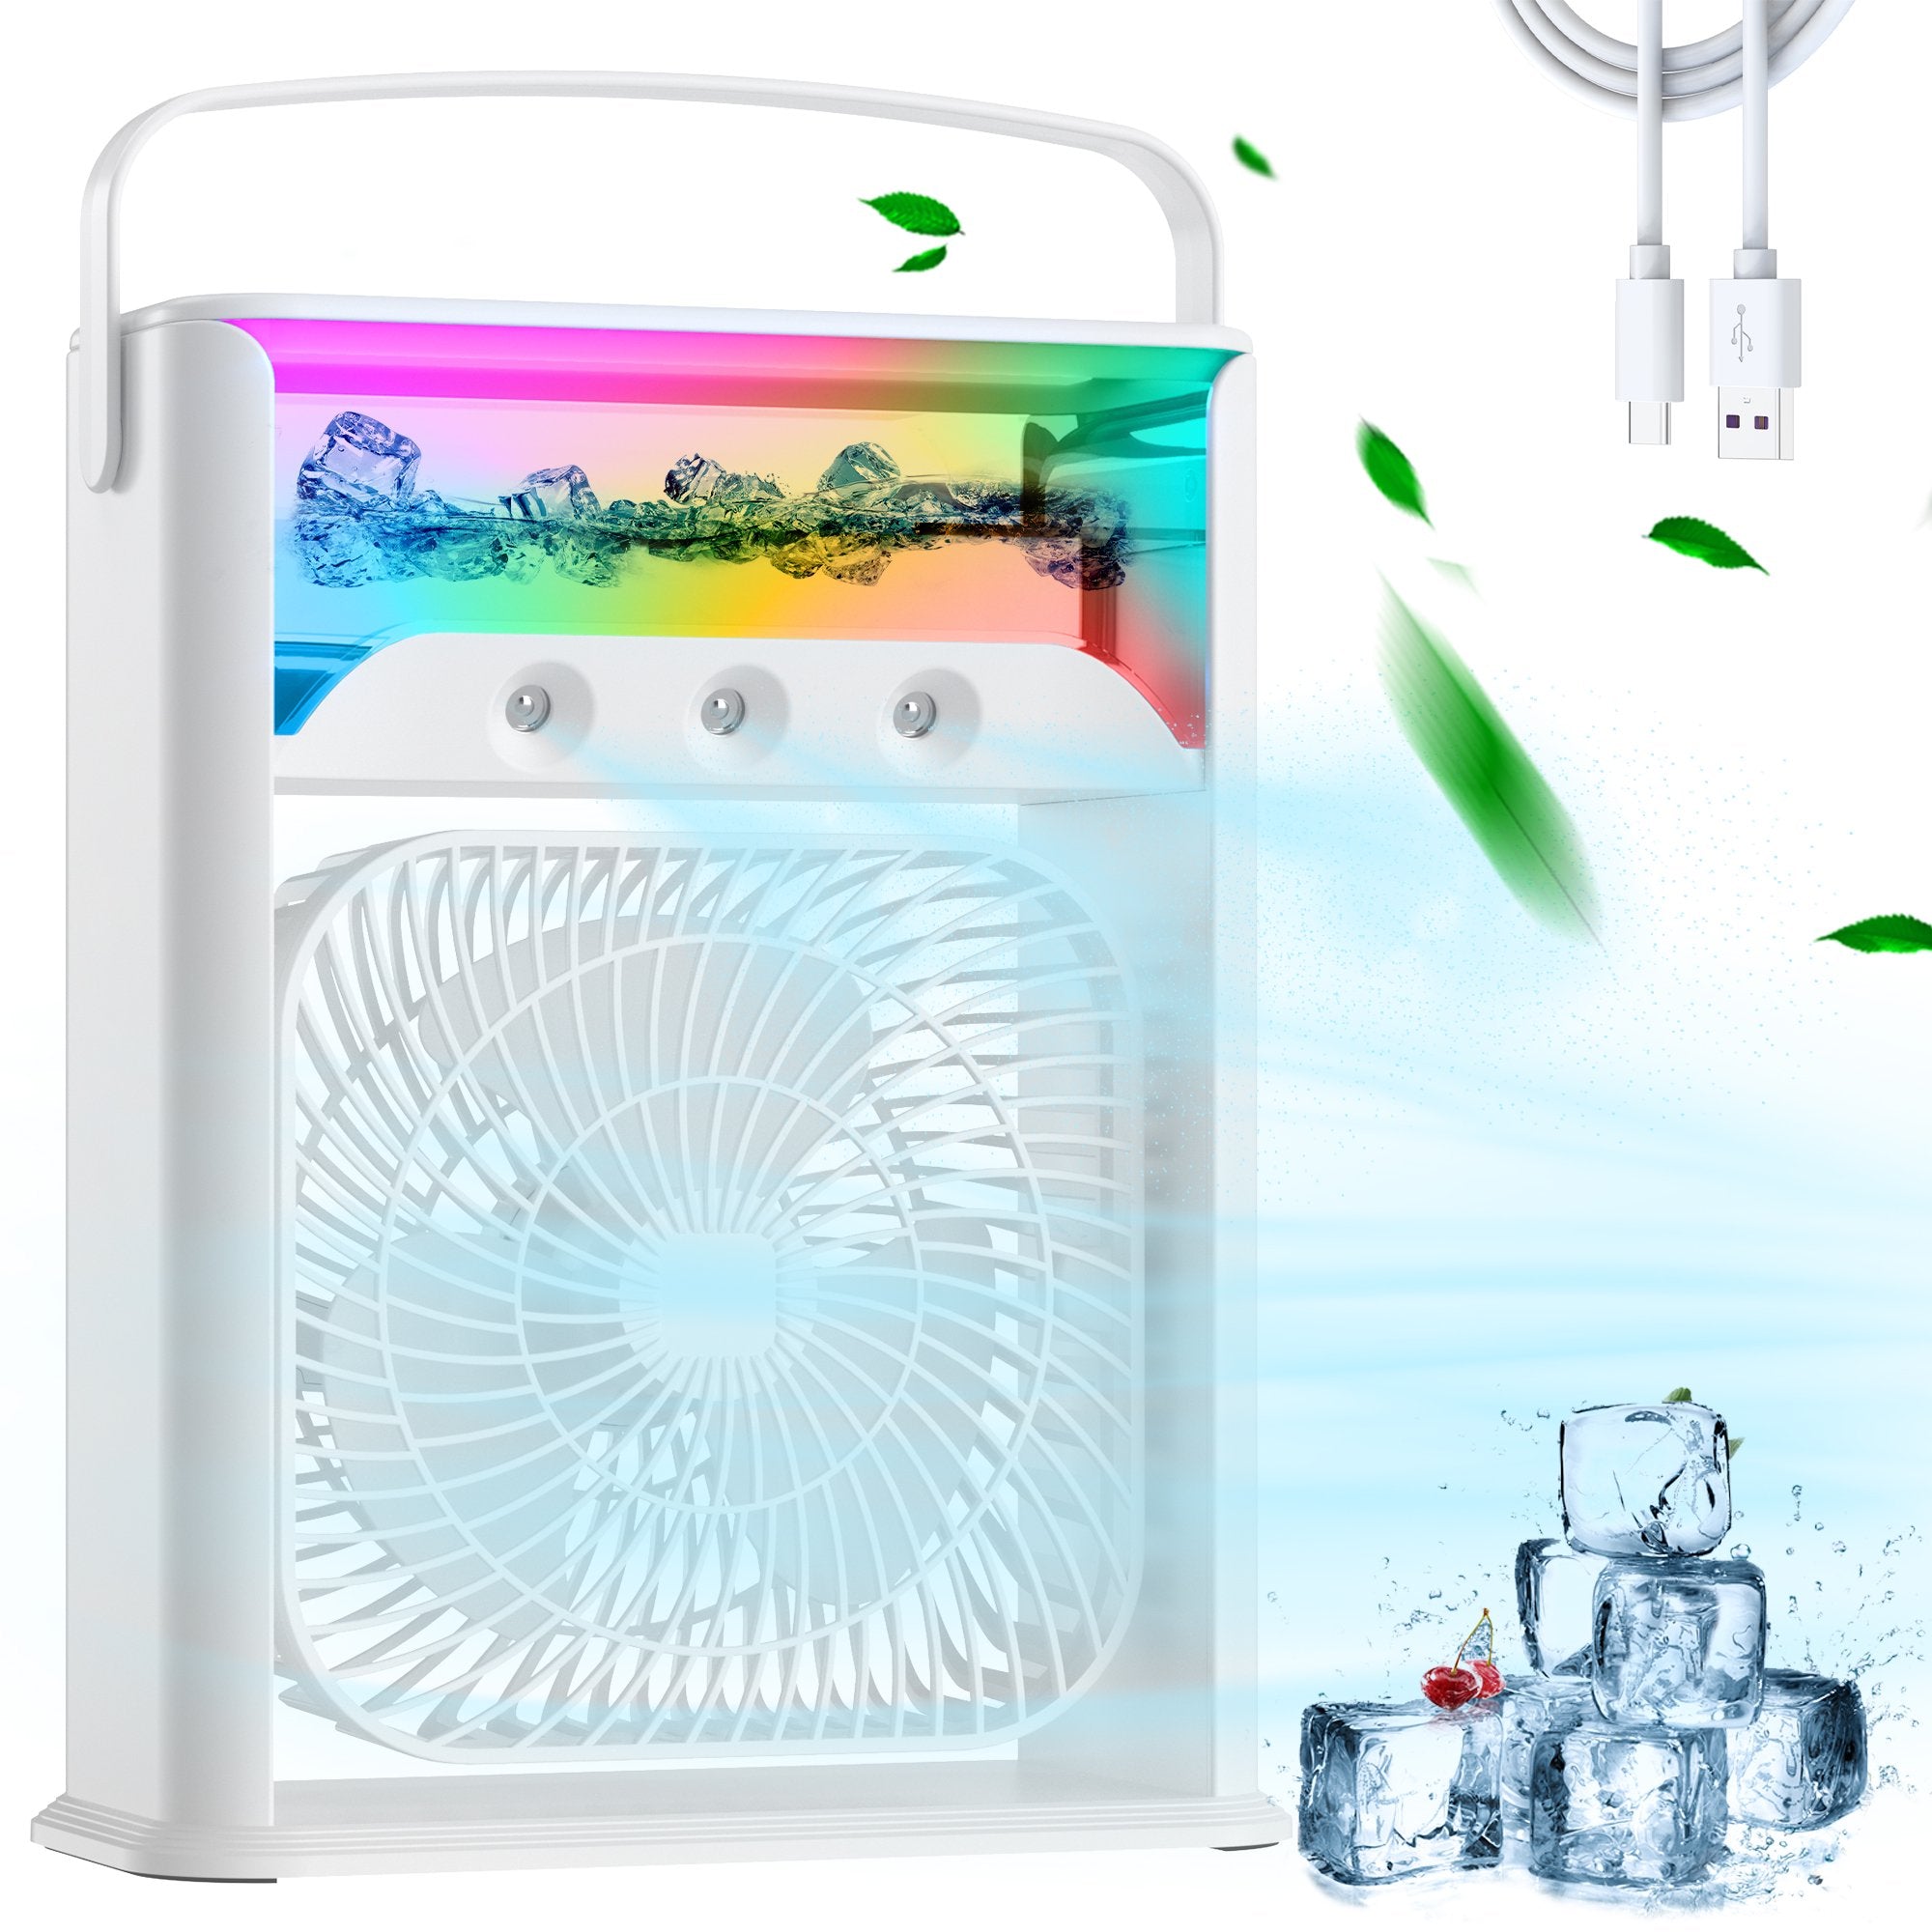 Portable Air Conditioner Fan, Mini Evaporative Desktop Air Humidifier Misting Cooler Fan for Room Home Office